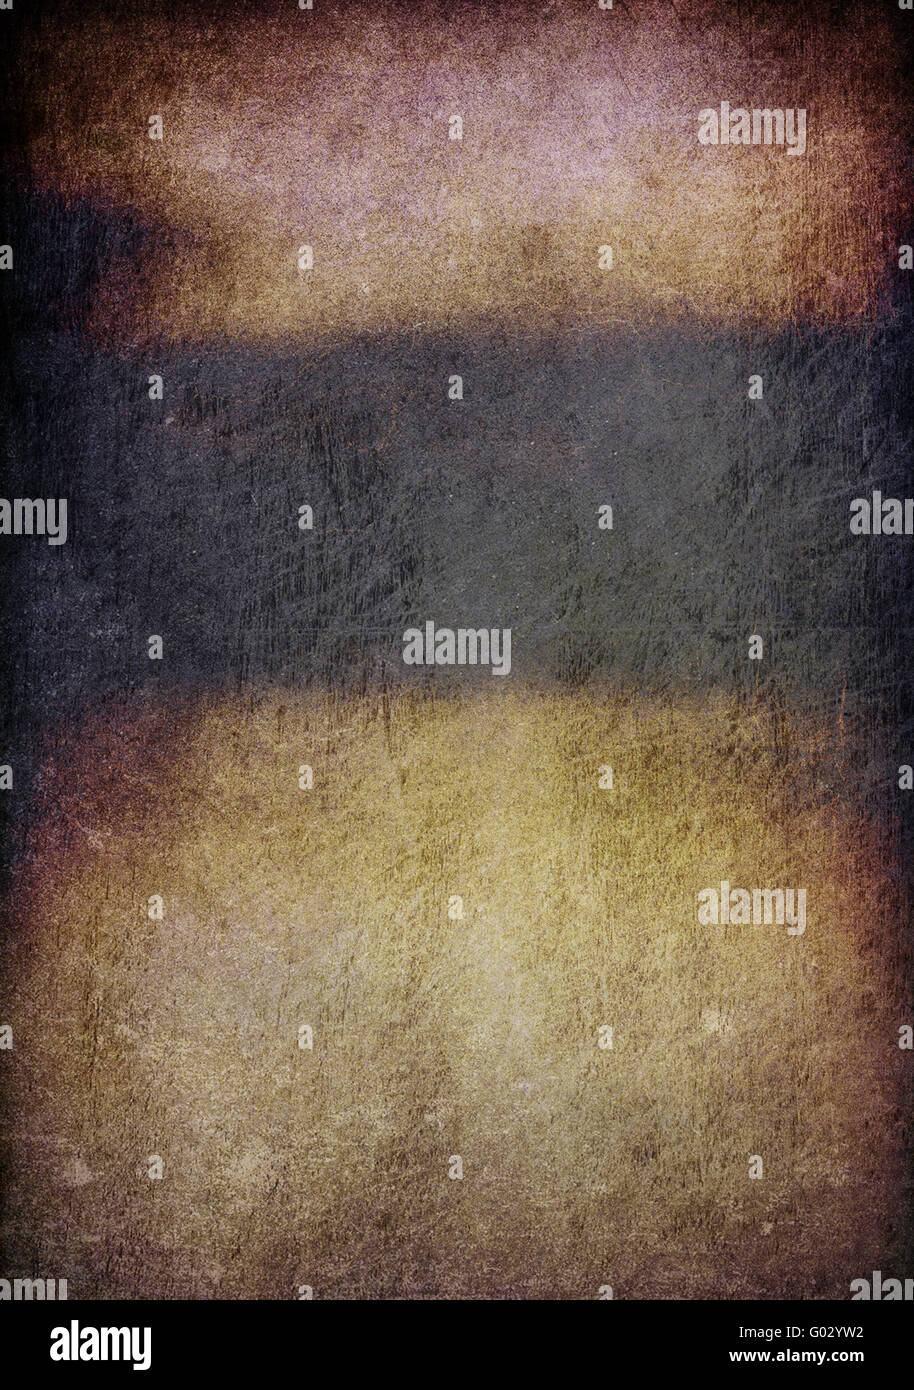 Grungy vintage abstract background with space for text. Stock Photo